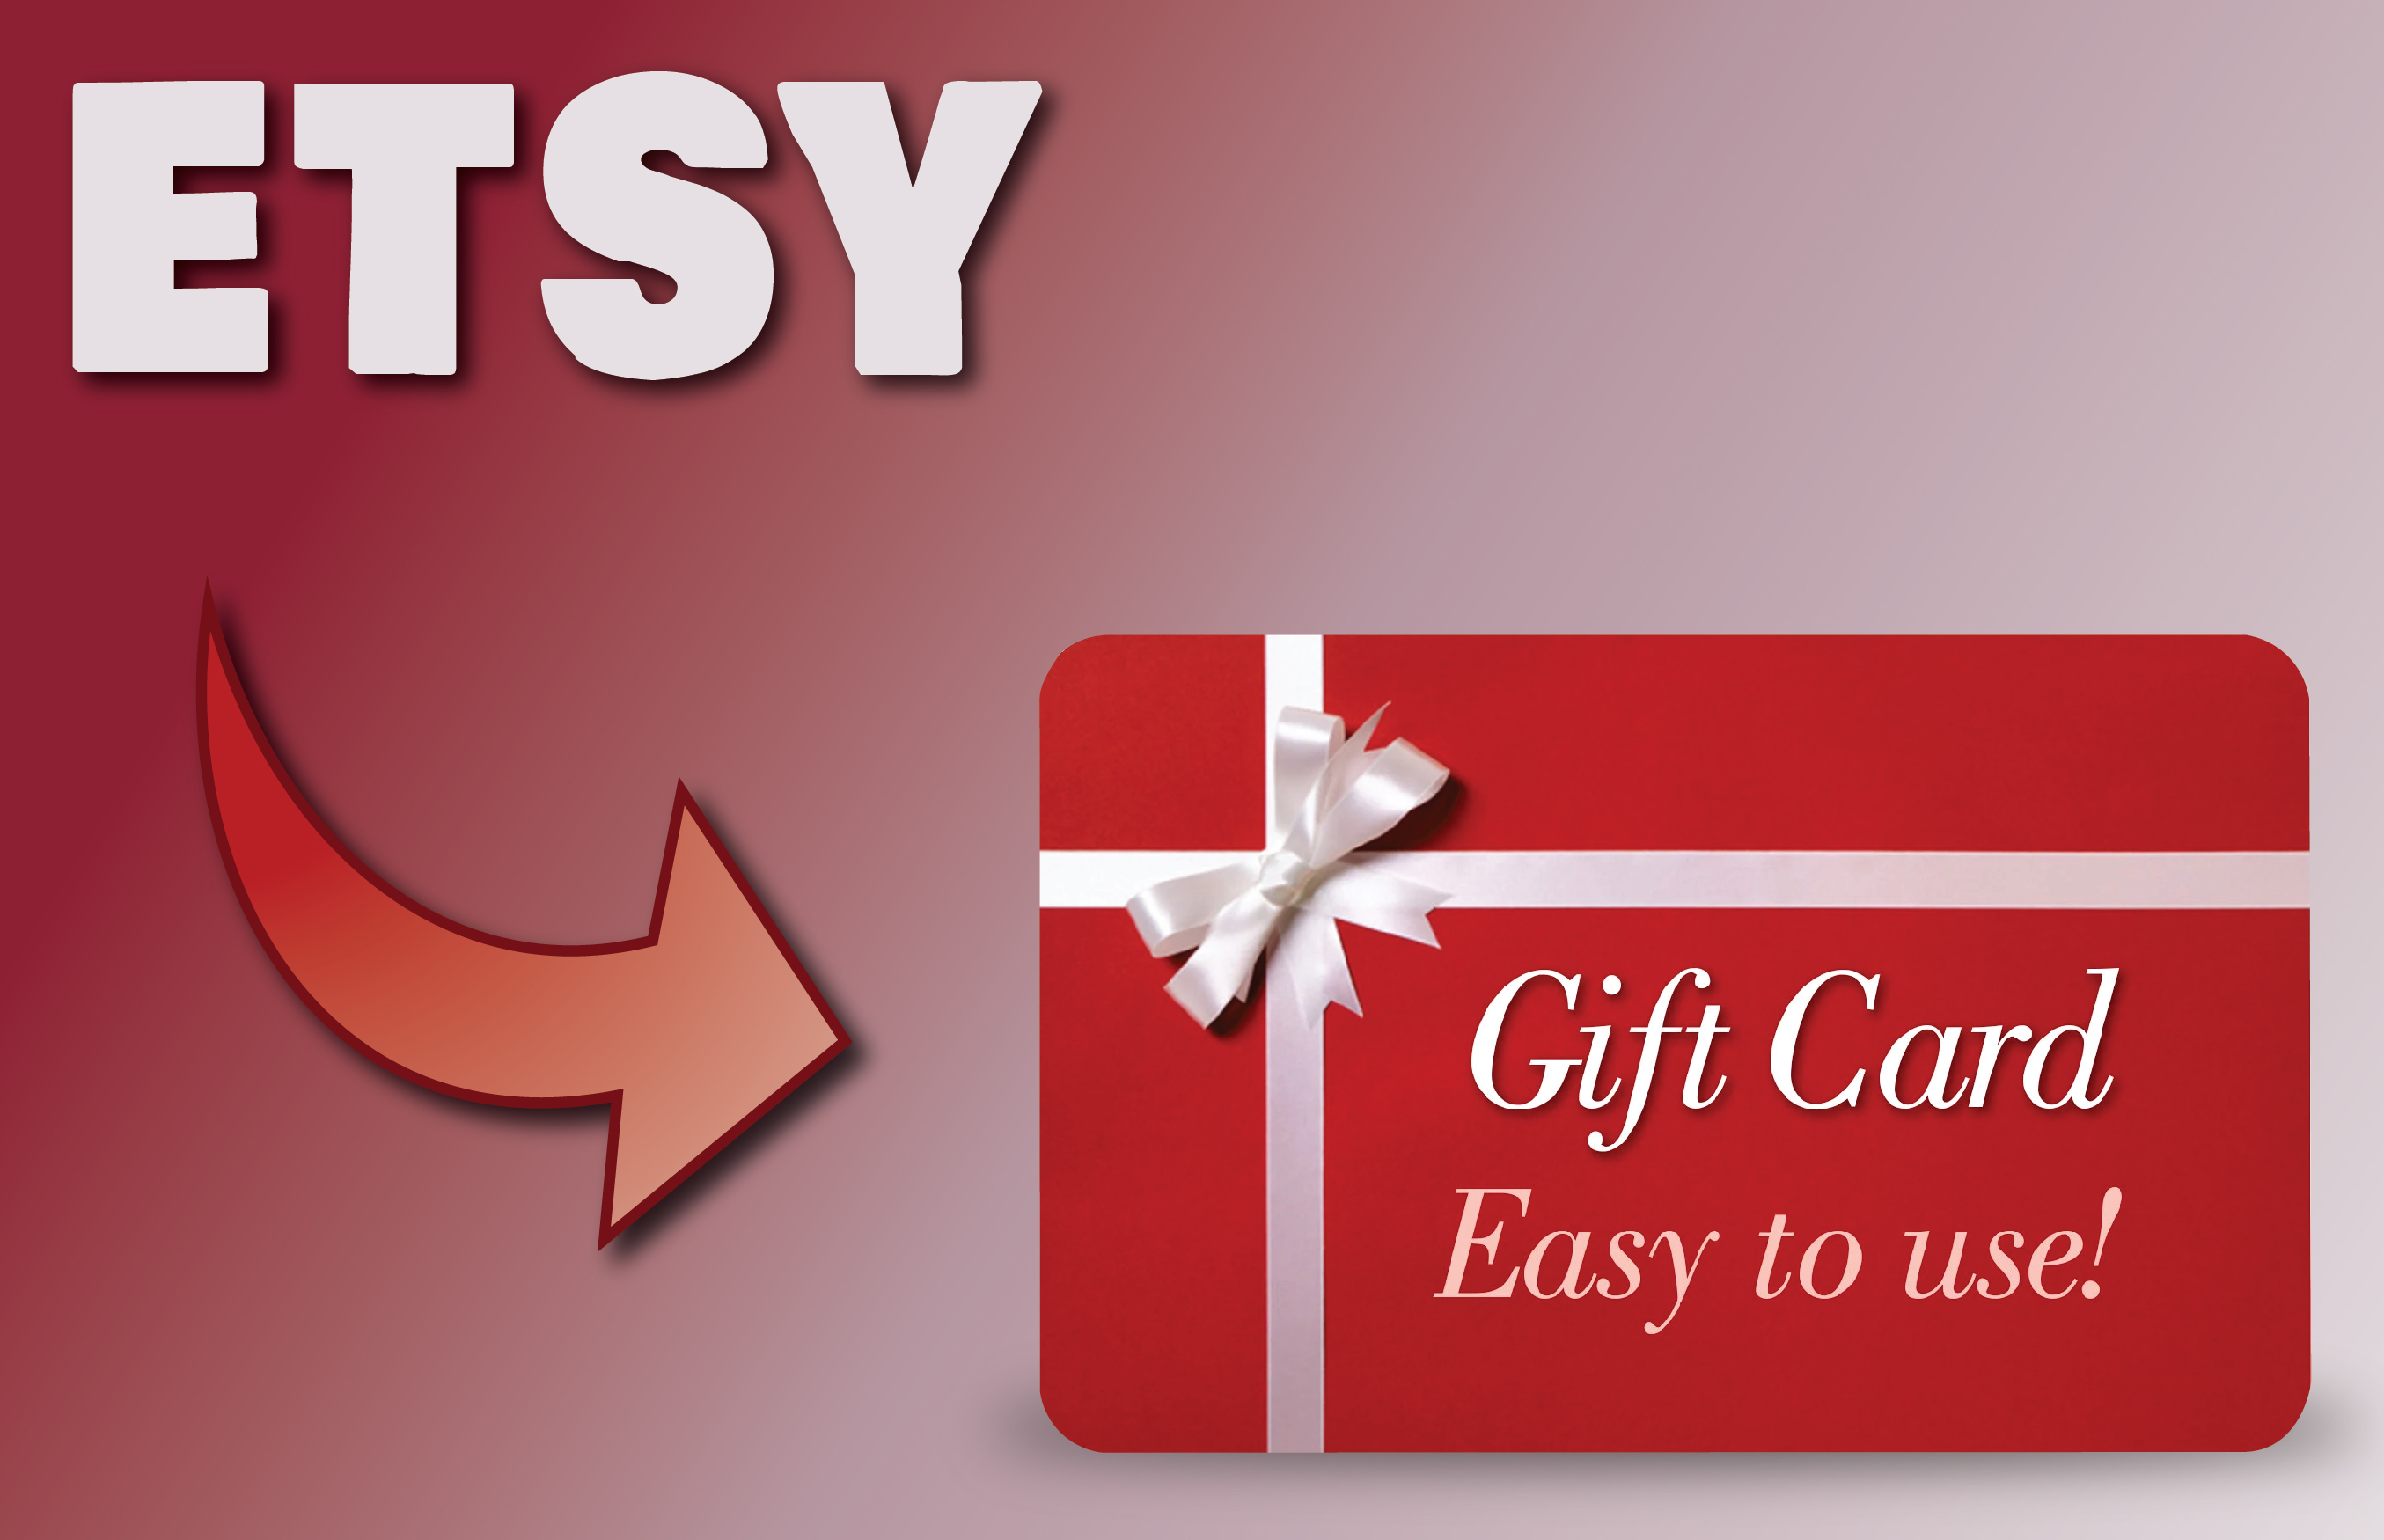 How Etsy Gift Cards Make The Perfect Present For Your Loved Ones?